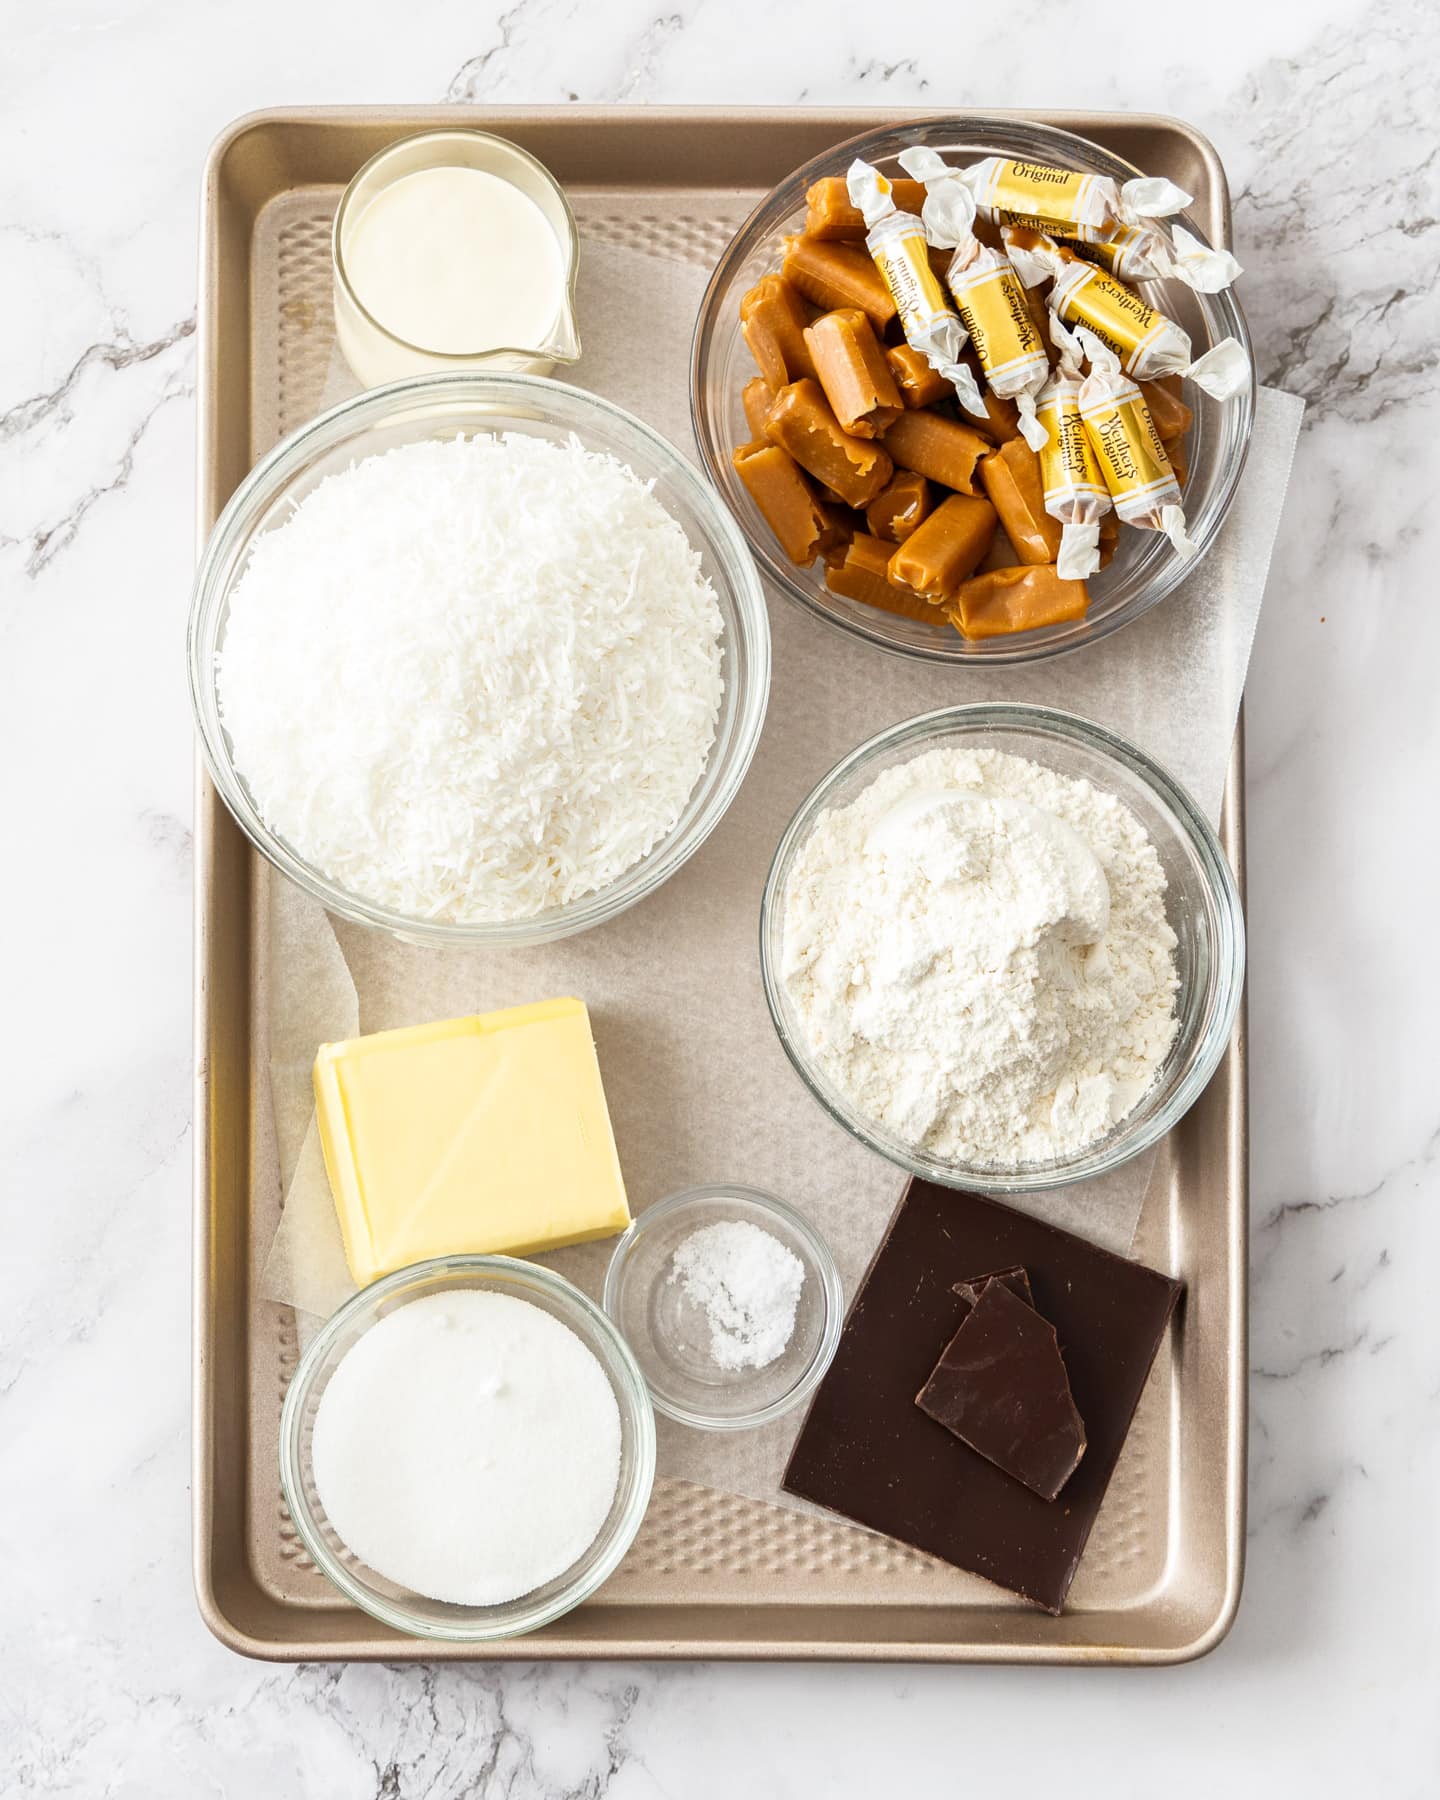 Ingredients for the caramel bars.